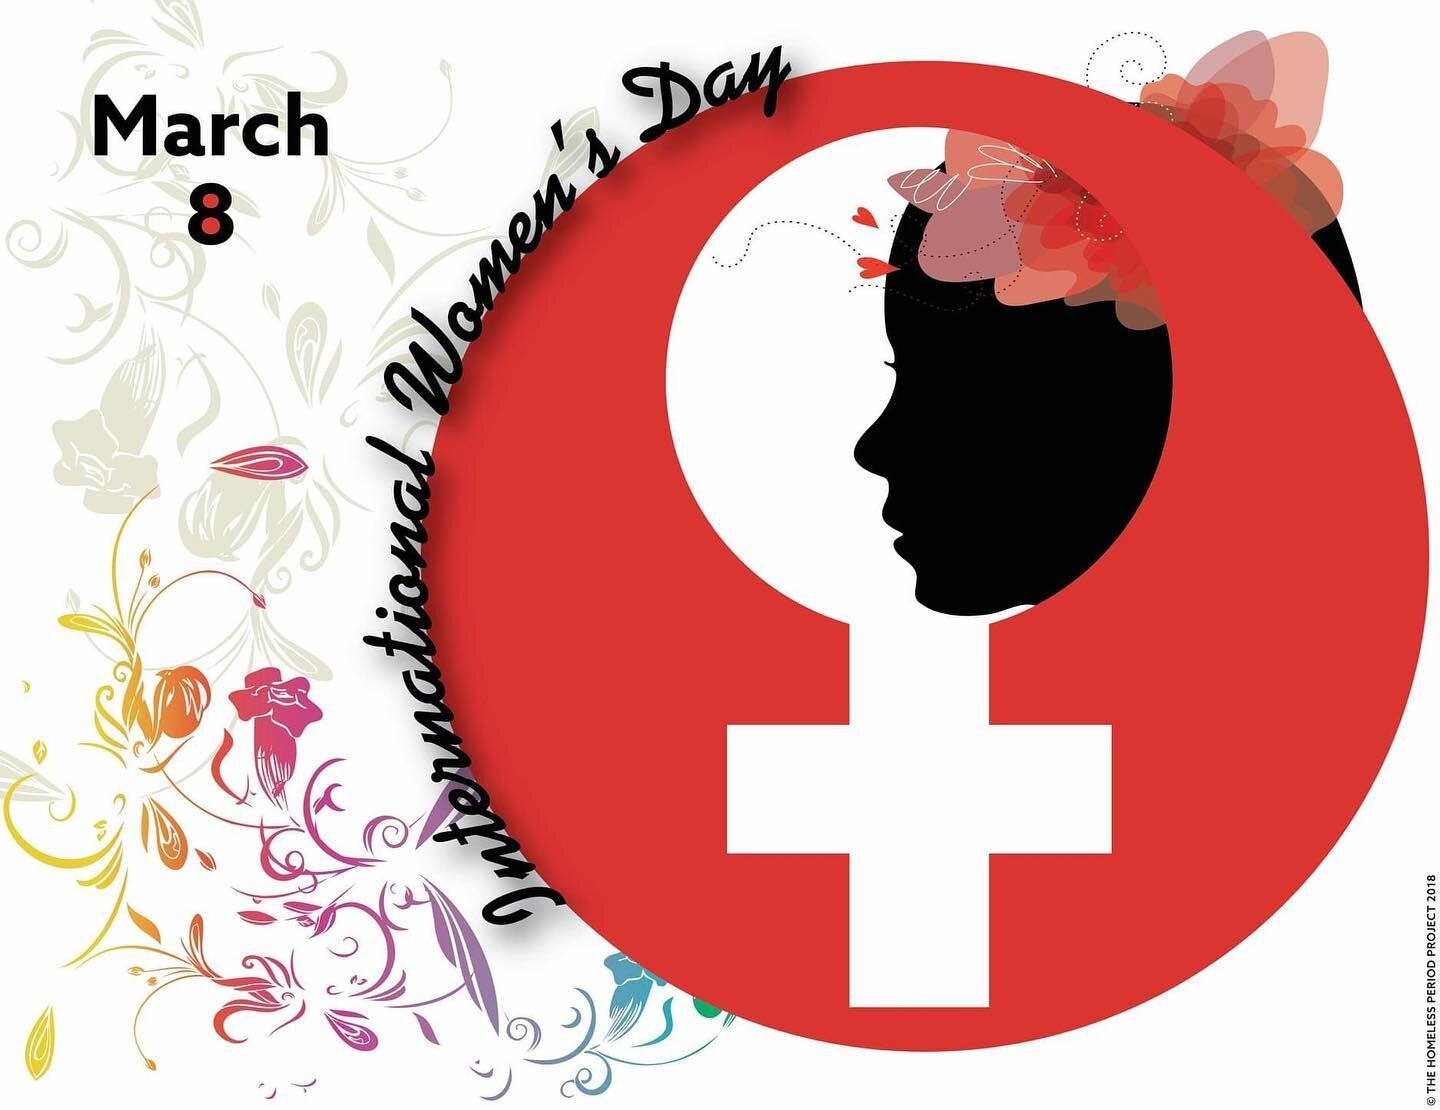 Please join me, Donna Stolzenberg, Melbourne Period Project The Homeless Period Ireland, National Homeless Collective, Melissa Soule, Brittany Martin The Homeless Period Project &amp; HPP Chapters in celebrating International Women's Day on March 8th